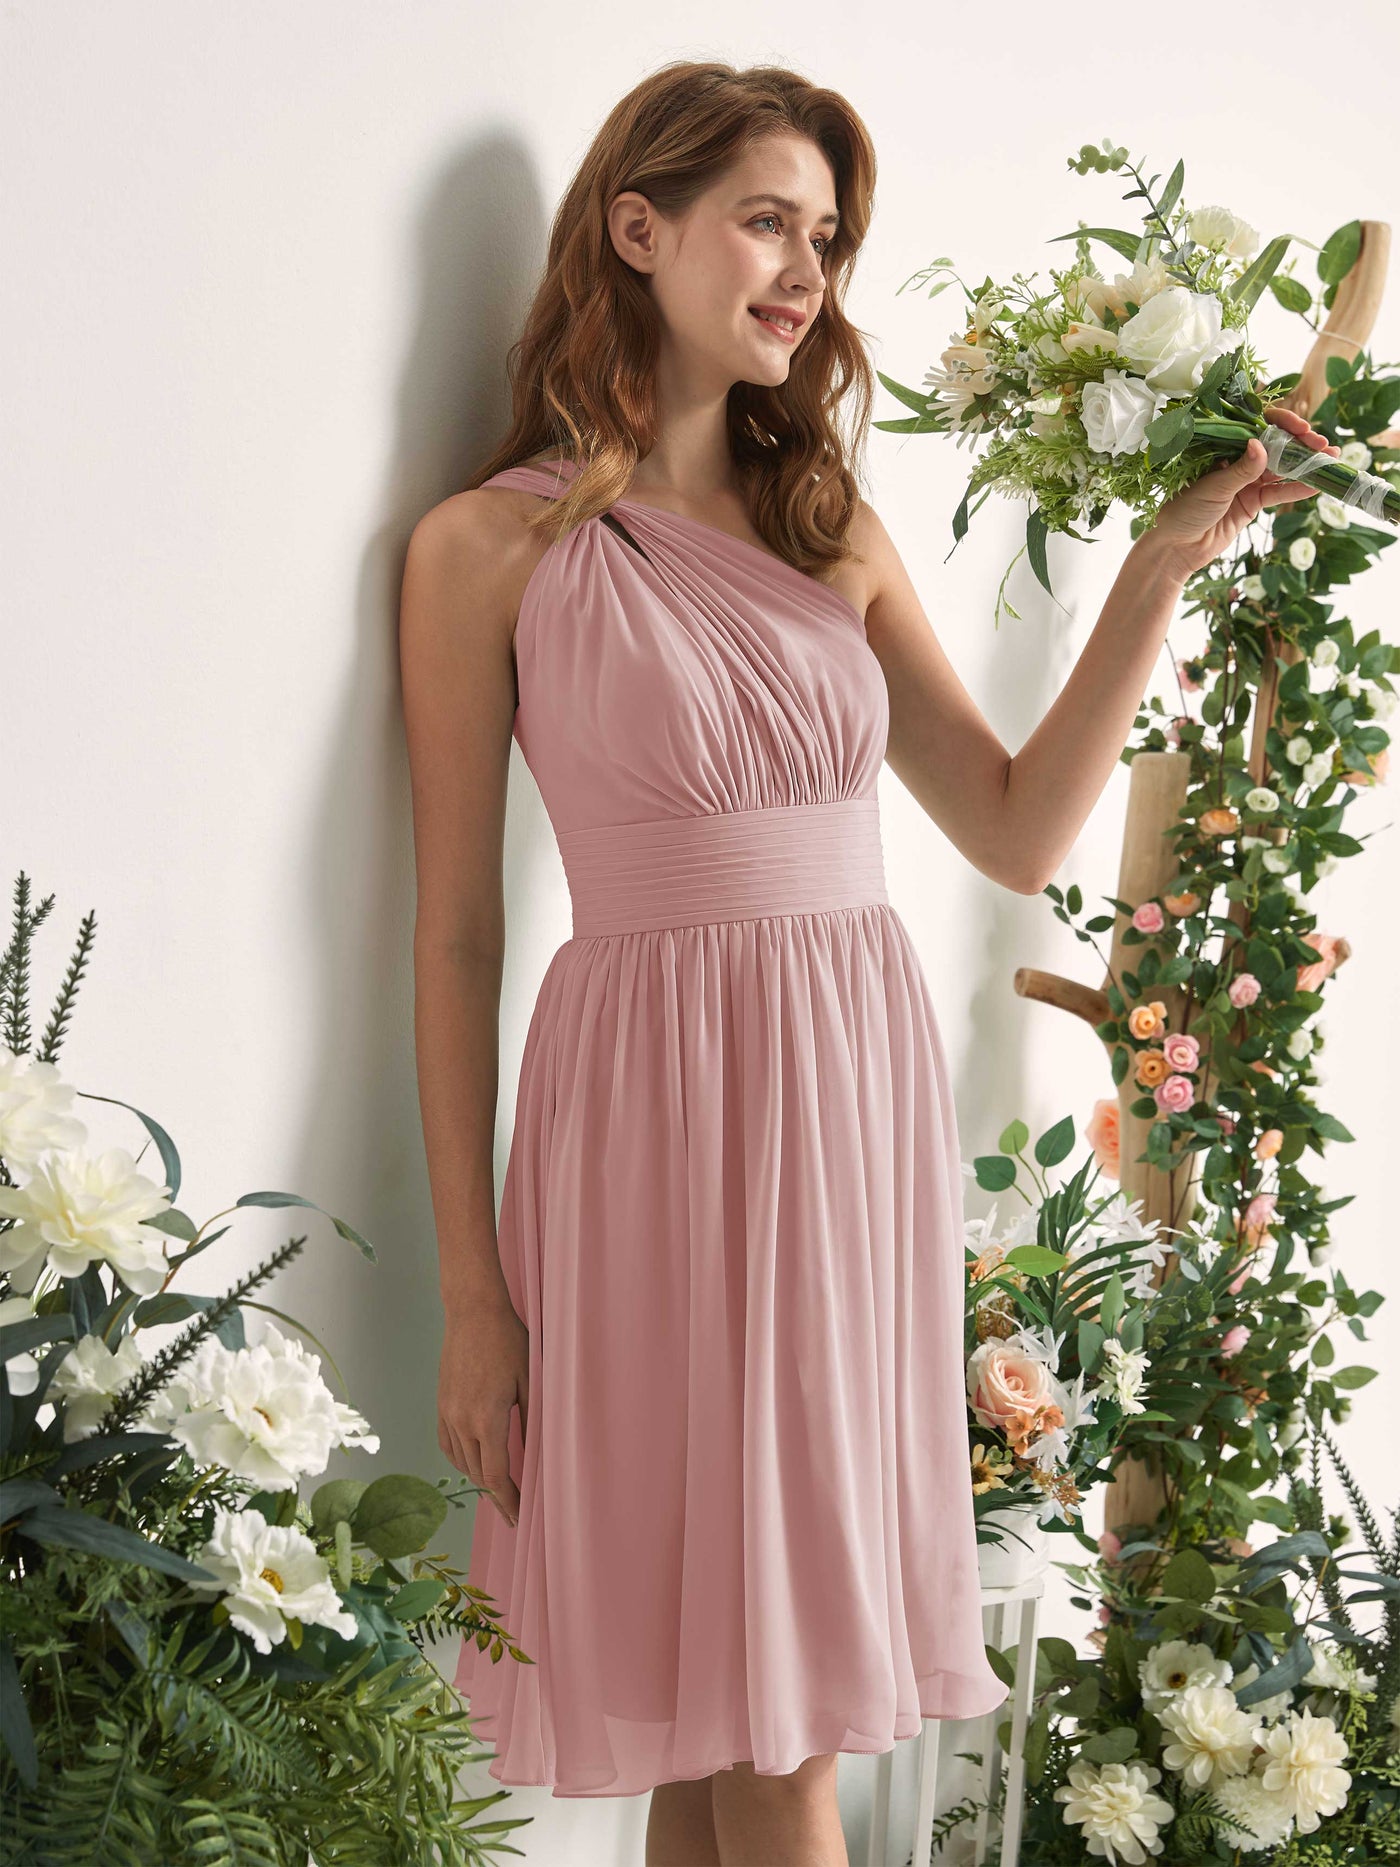 Bridesmaid Dress A-line Chiffon One Shoulder Knee Length Sleeveless Wedding Party Dress - Dusty Rose (81221209)#color_dusty-rose